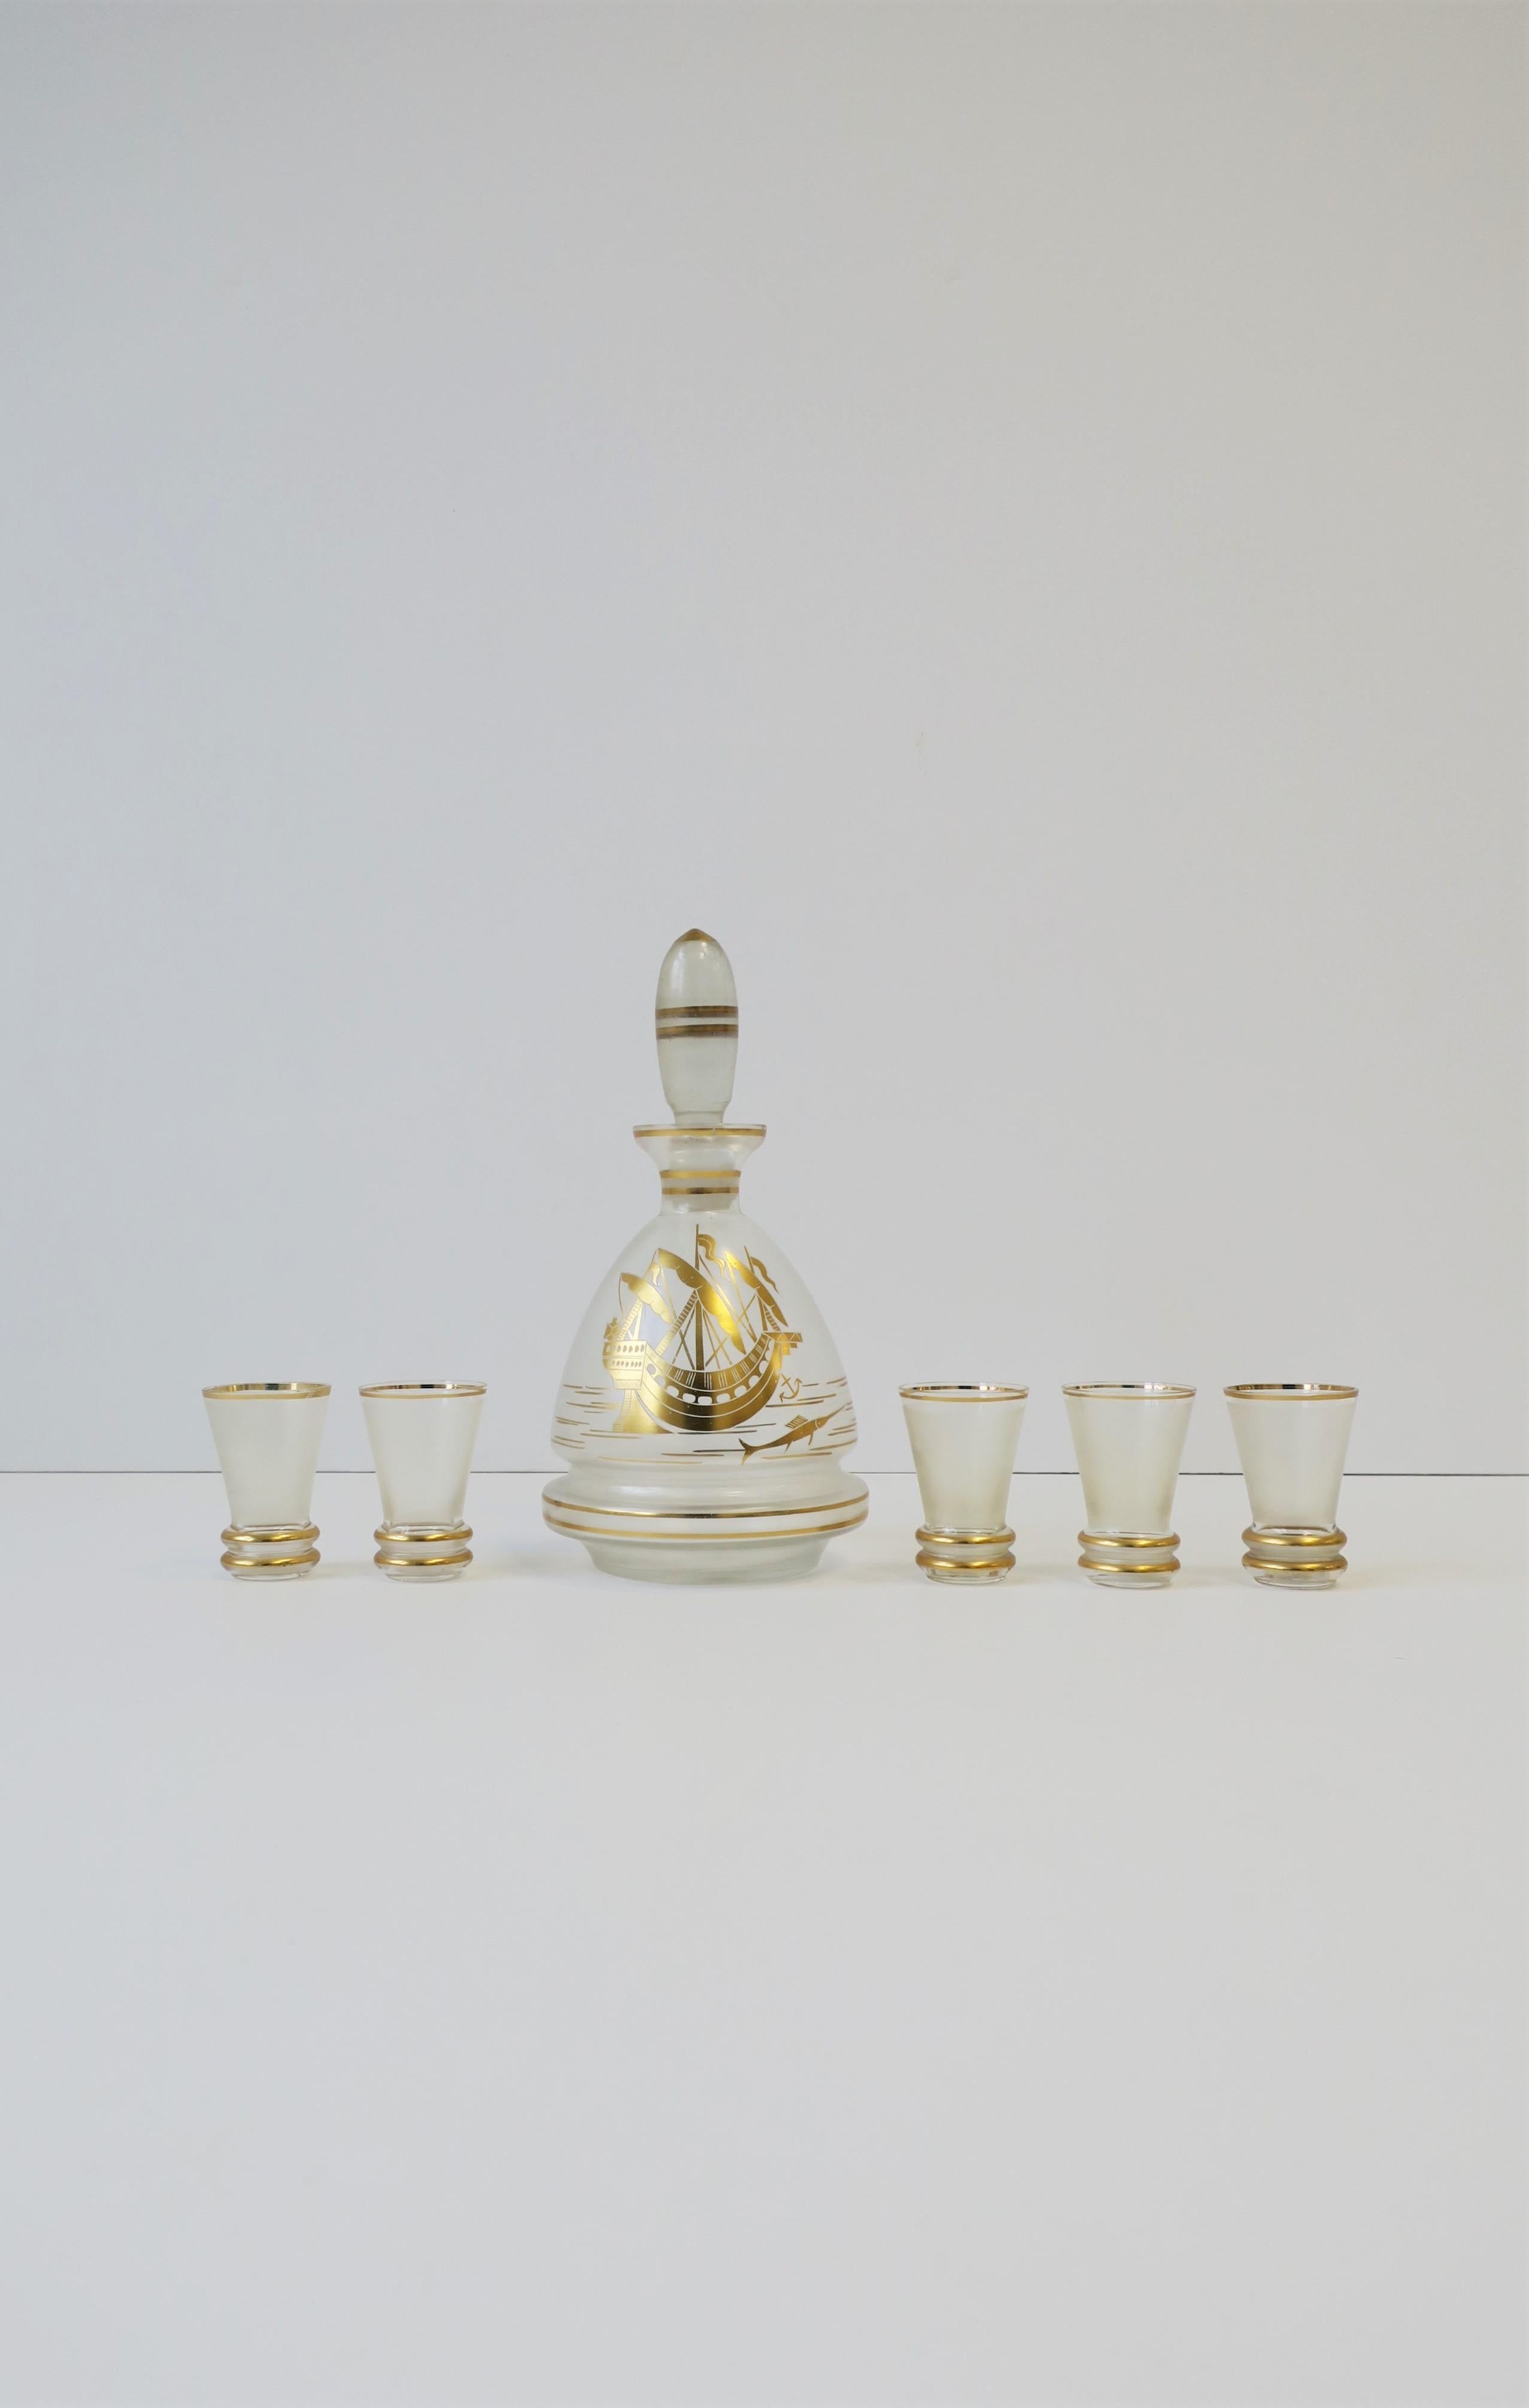 A very beautiful clear and gold spirits or liquor decanter and shot glass set from Czechoslovakia, circa mid-20th century, Europe. Beautiful gold details include nautical scene of a ship with sails, boat anchor, and swordfish. Each shot glass is